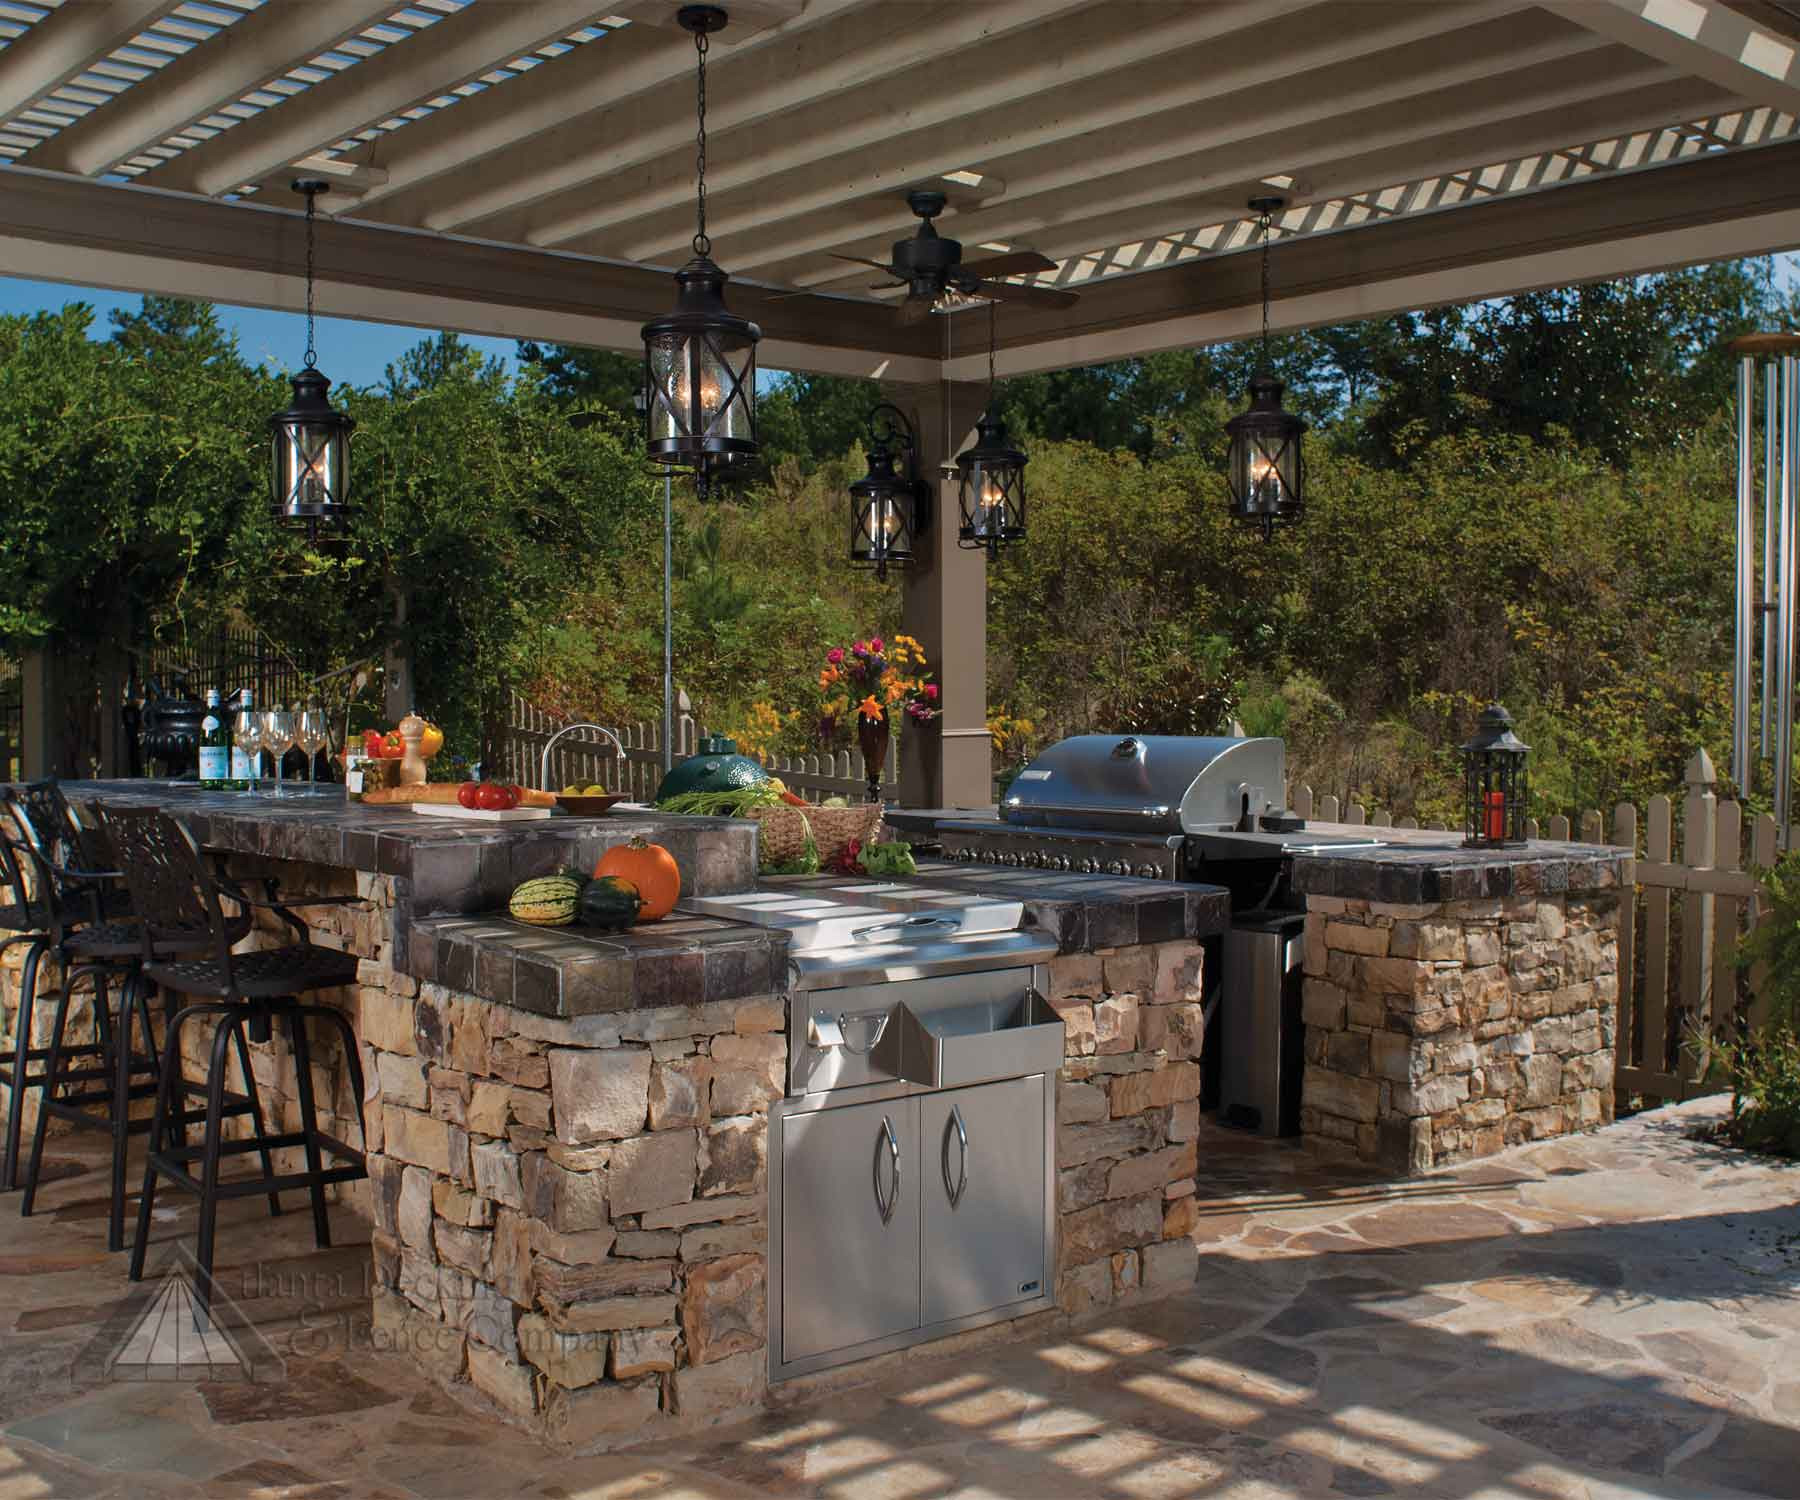 Outdoor Kitchen Ideas
 Outdoor Kitchen Designing The Perfect Backyard Cooking